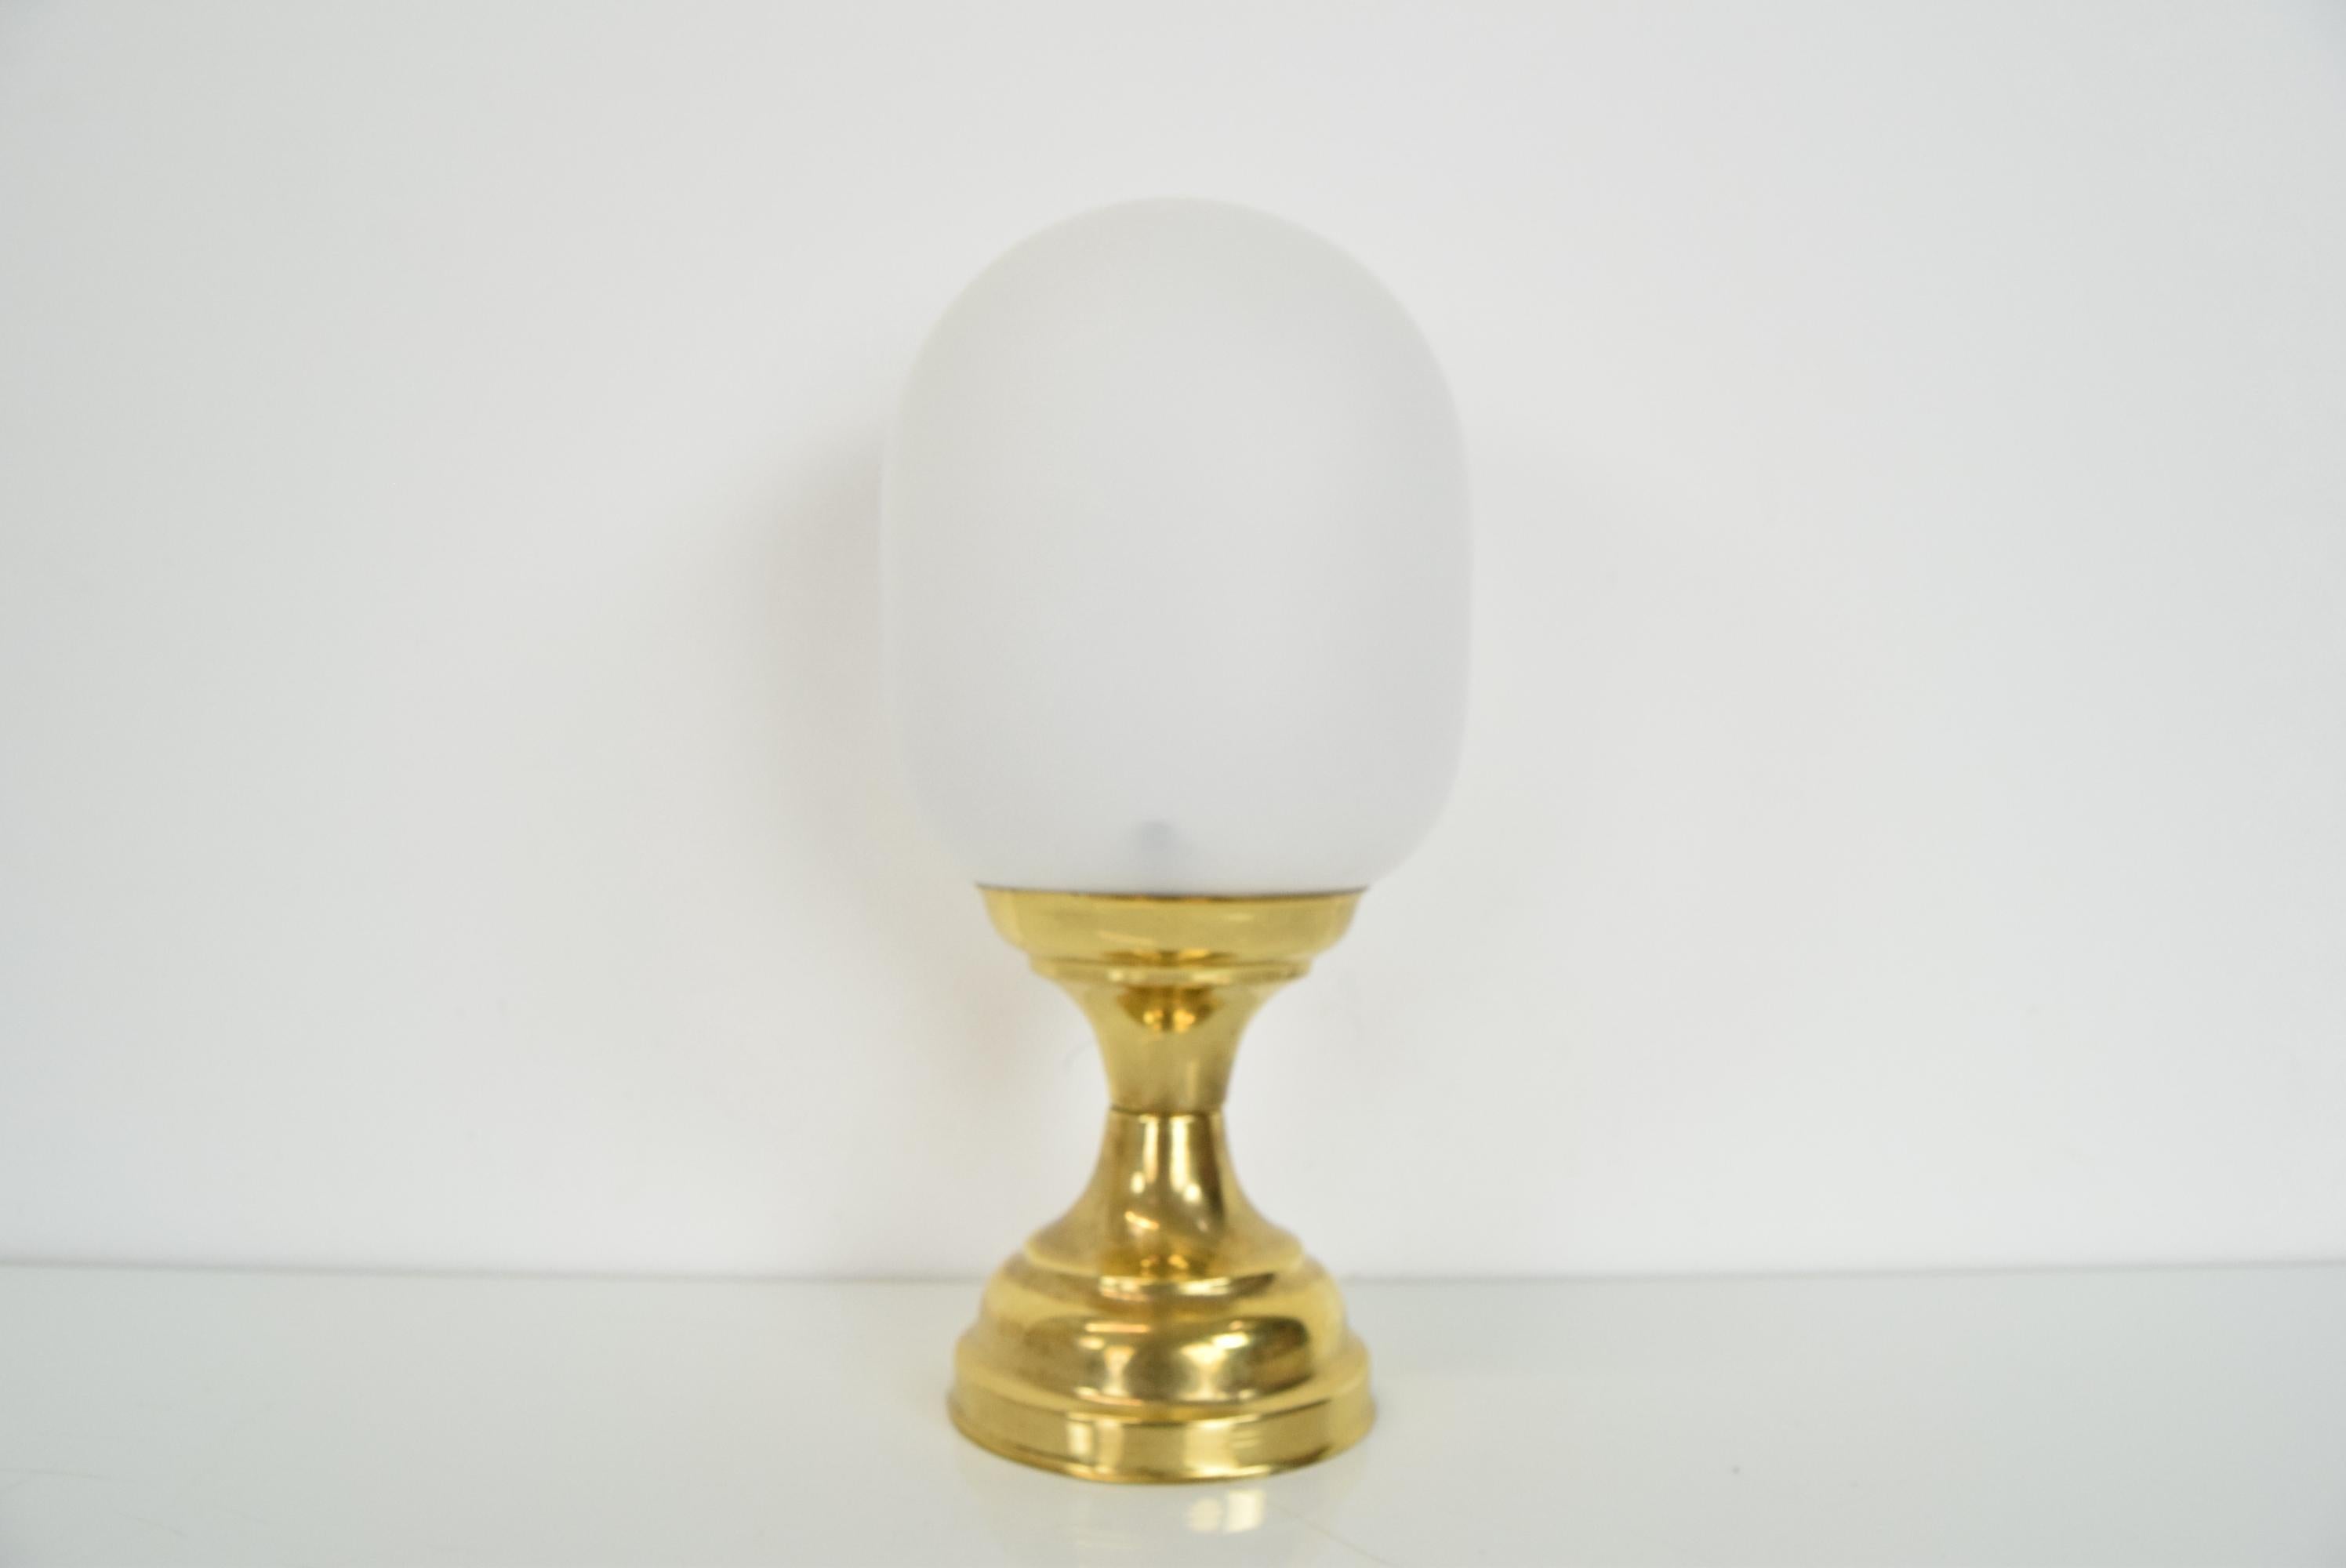 
Made in Czechoslovakia
Made of Milk Glass,Brass
Fitted with new wiring
With aged patina
US adapter included
1x E27 or E26 bulb
Good original condition.